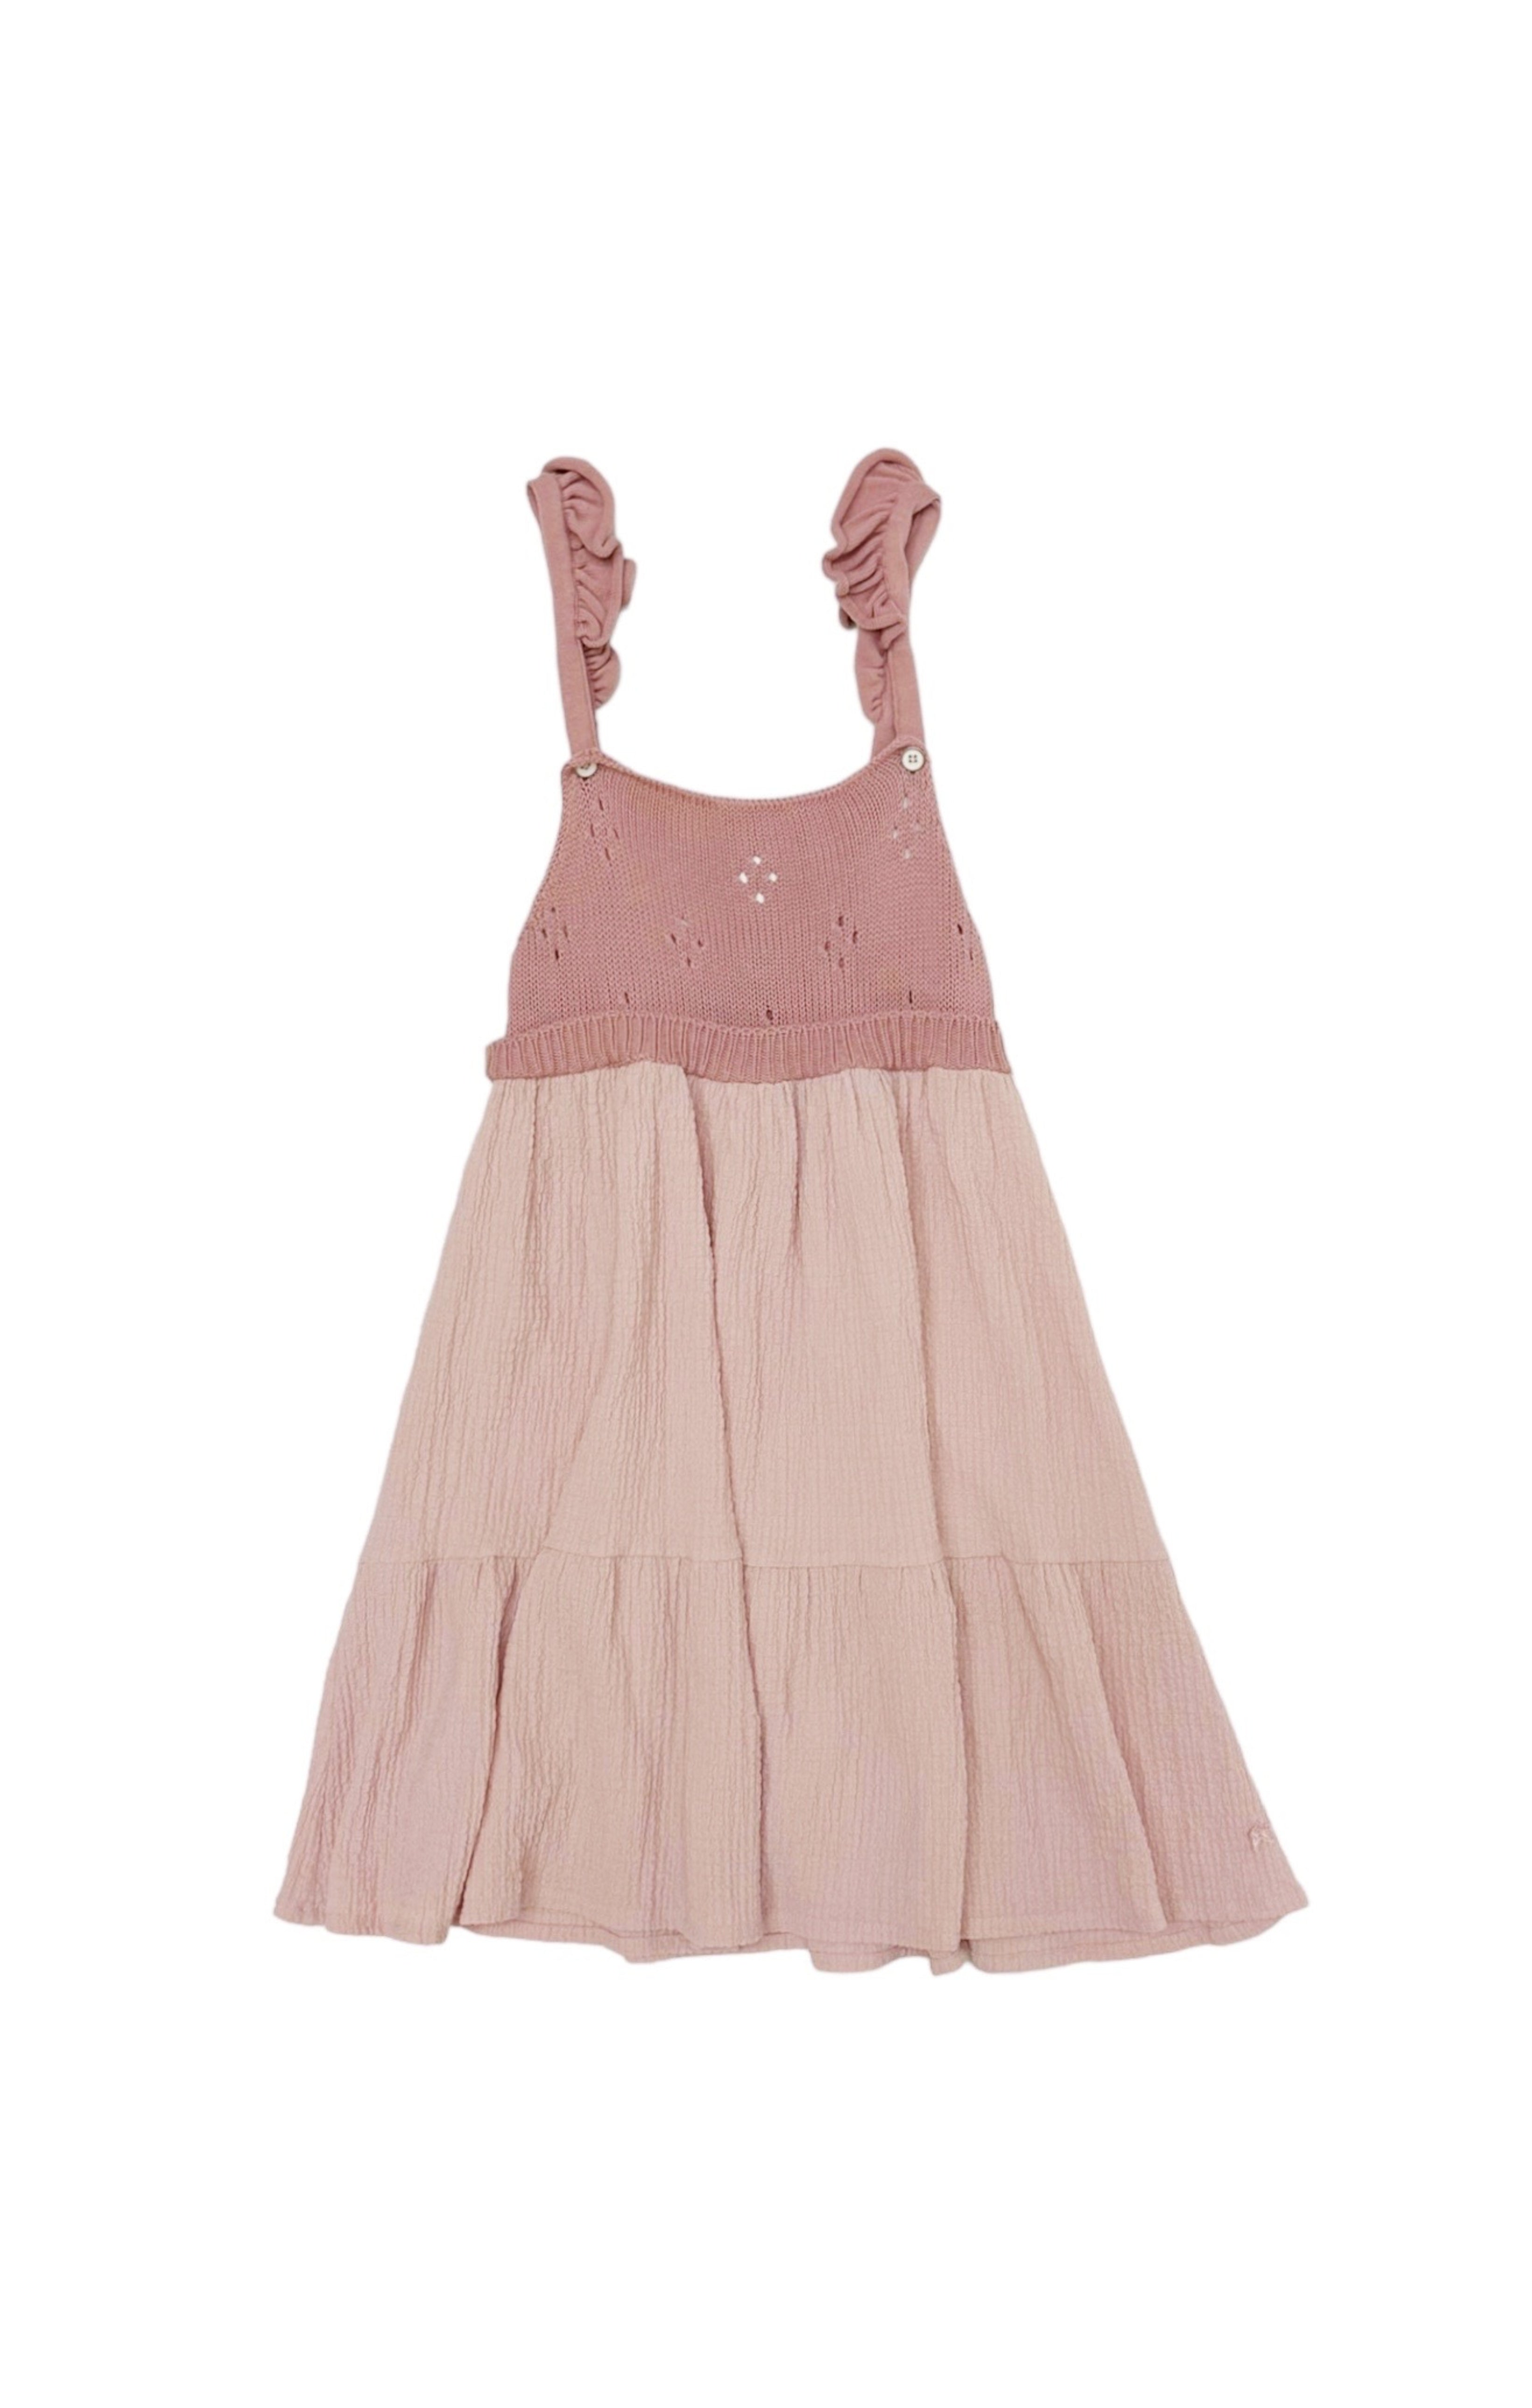 TOCOTO VINTAGE Dress Size: 6 Years